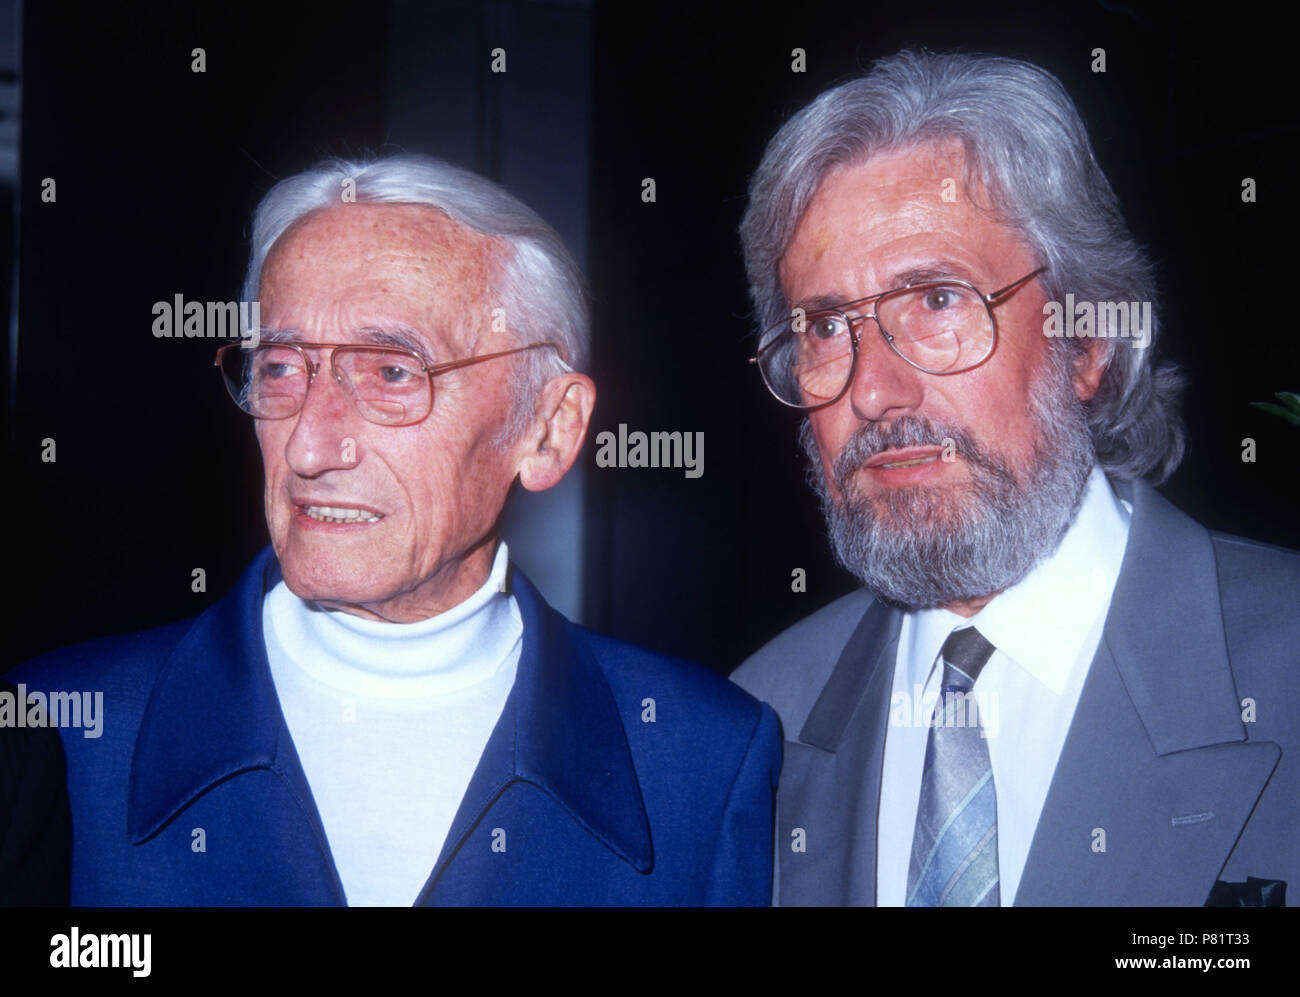 Jean Michel Cousteau High Resolution Stock Photography and Images - Alamy